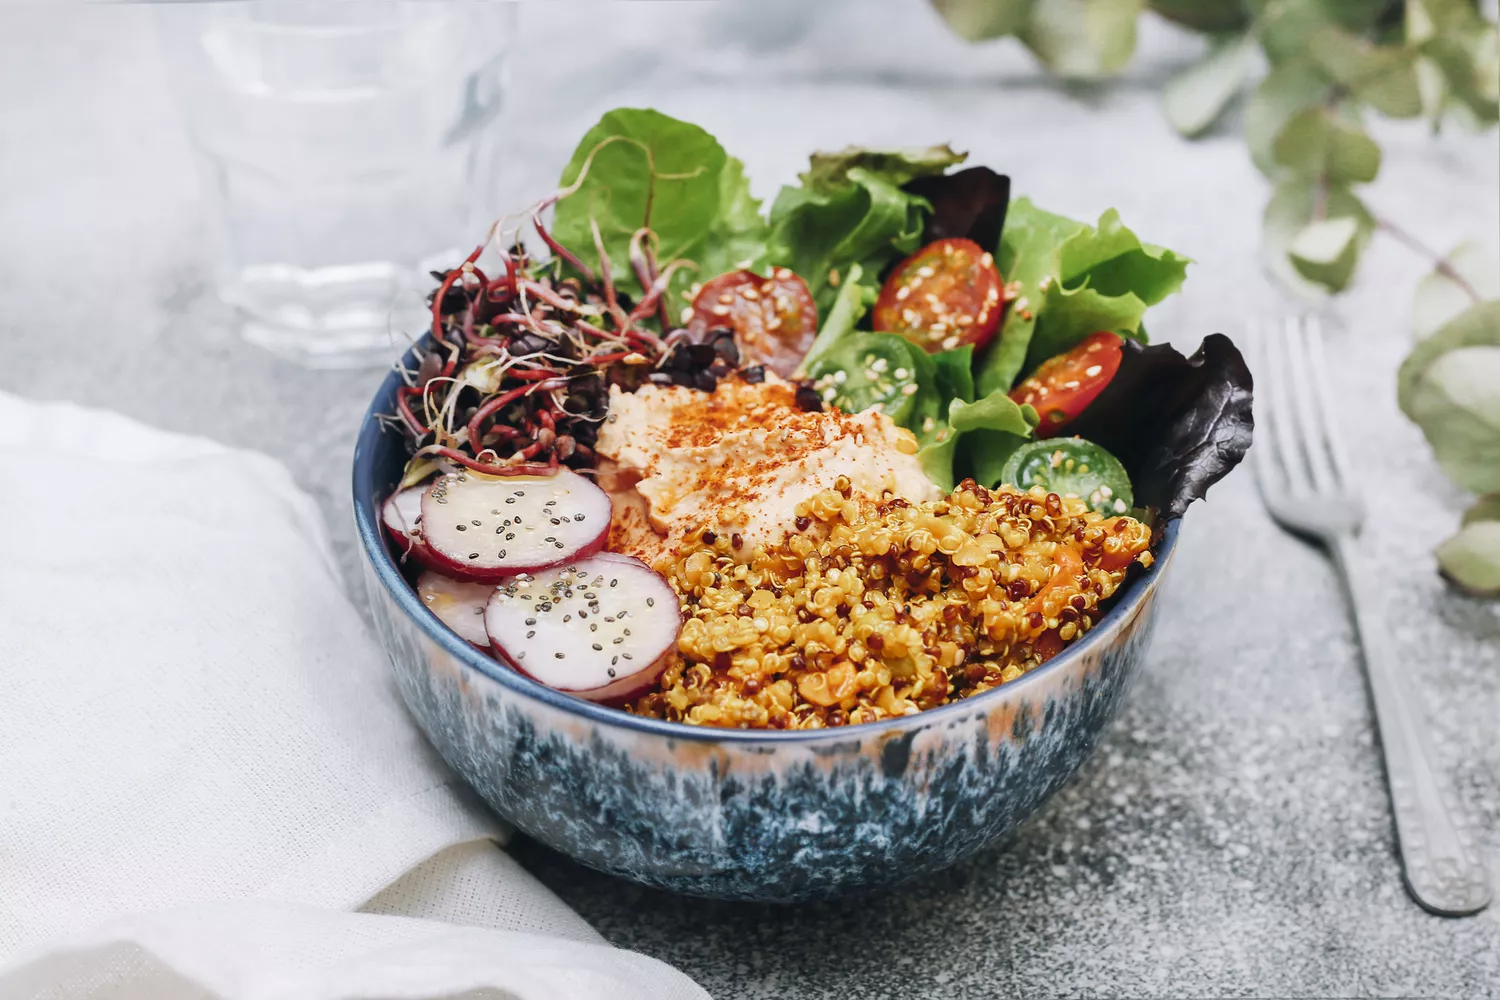 Bowl with quinoa, lettuce, radish, tomatoes and hummus. Sitting on table beside a fork.